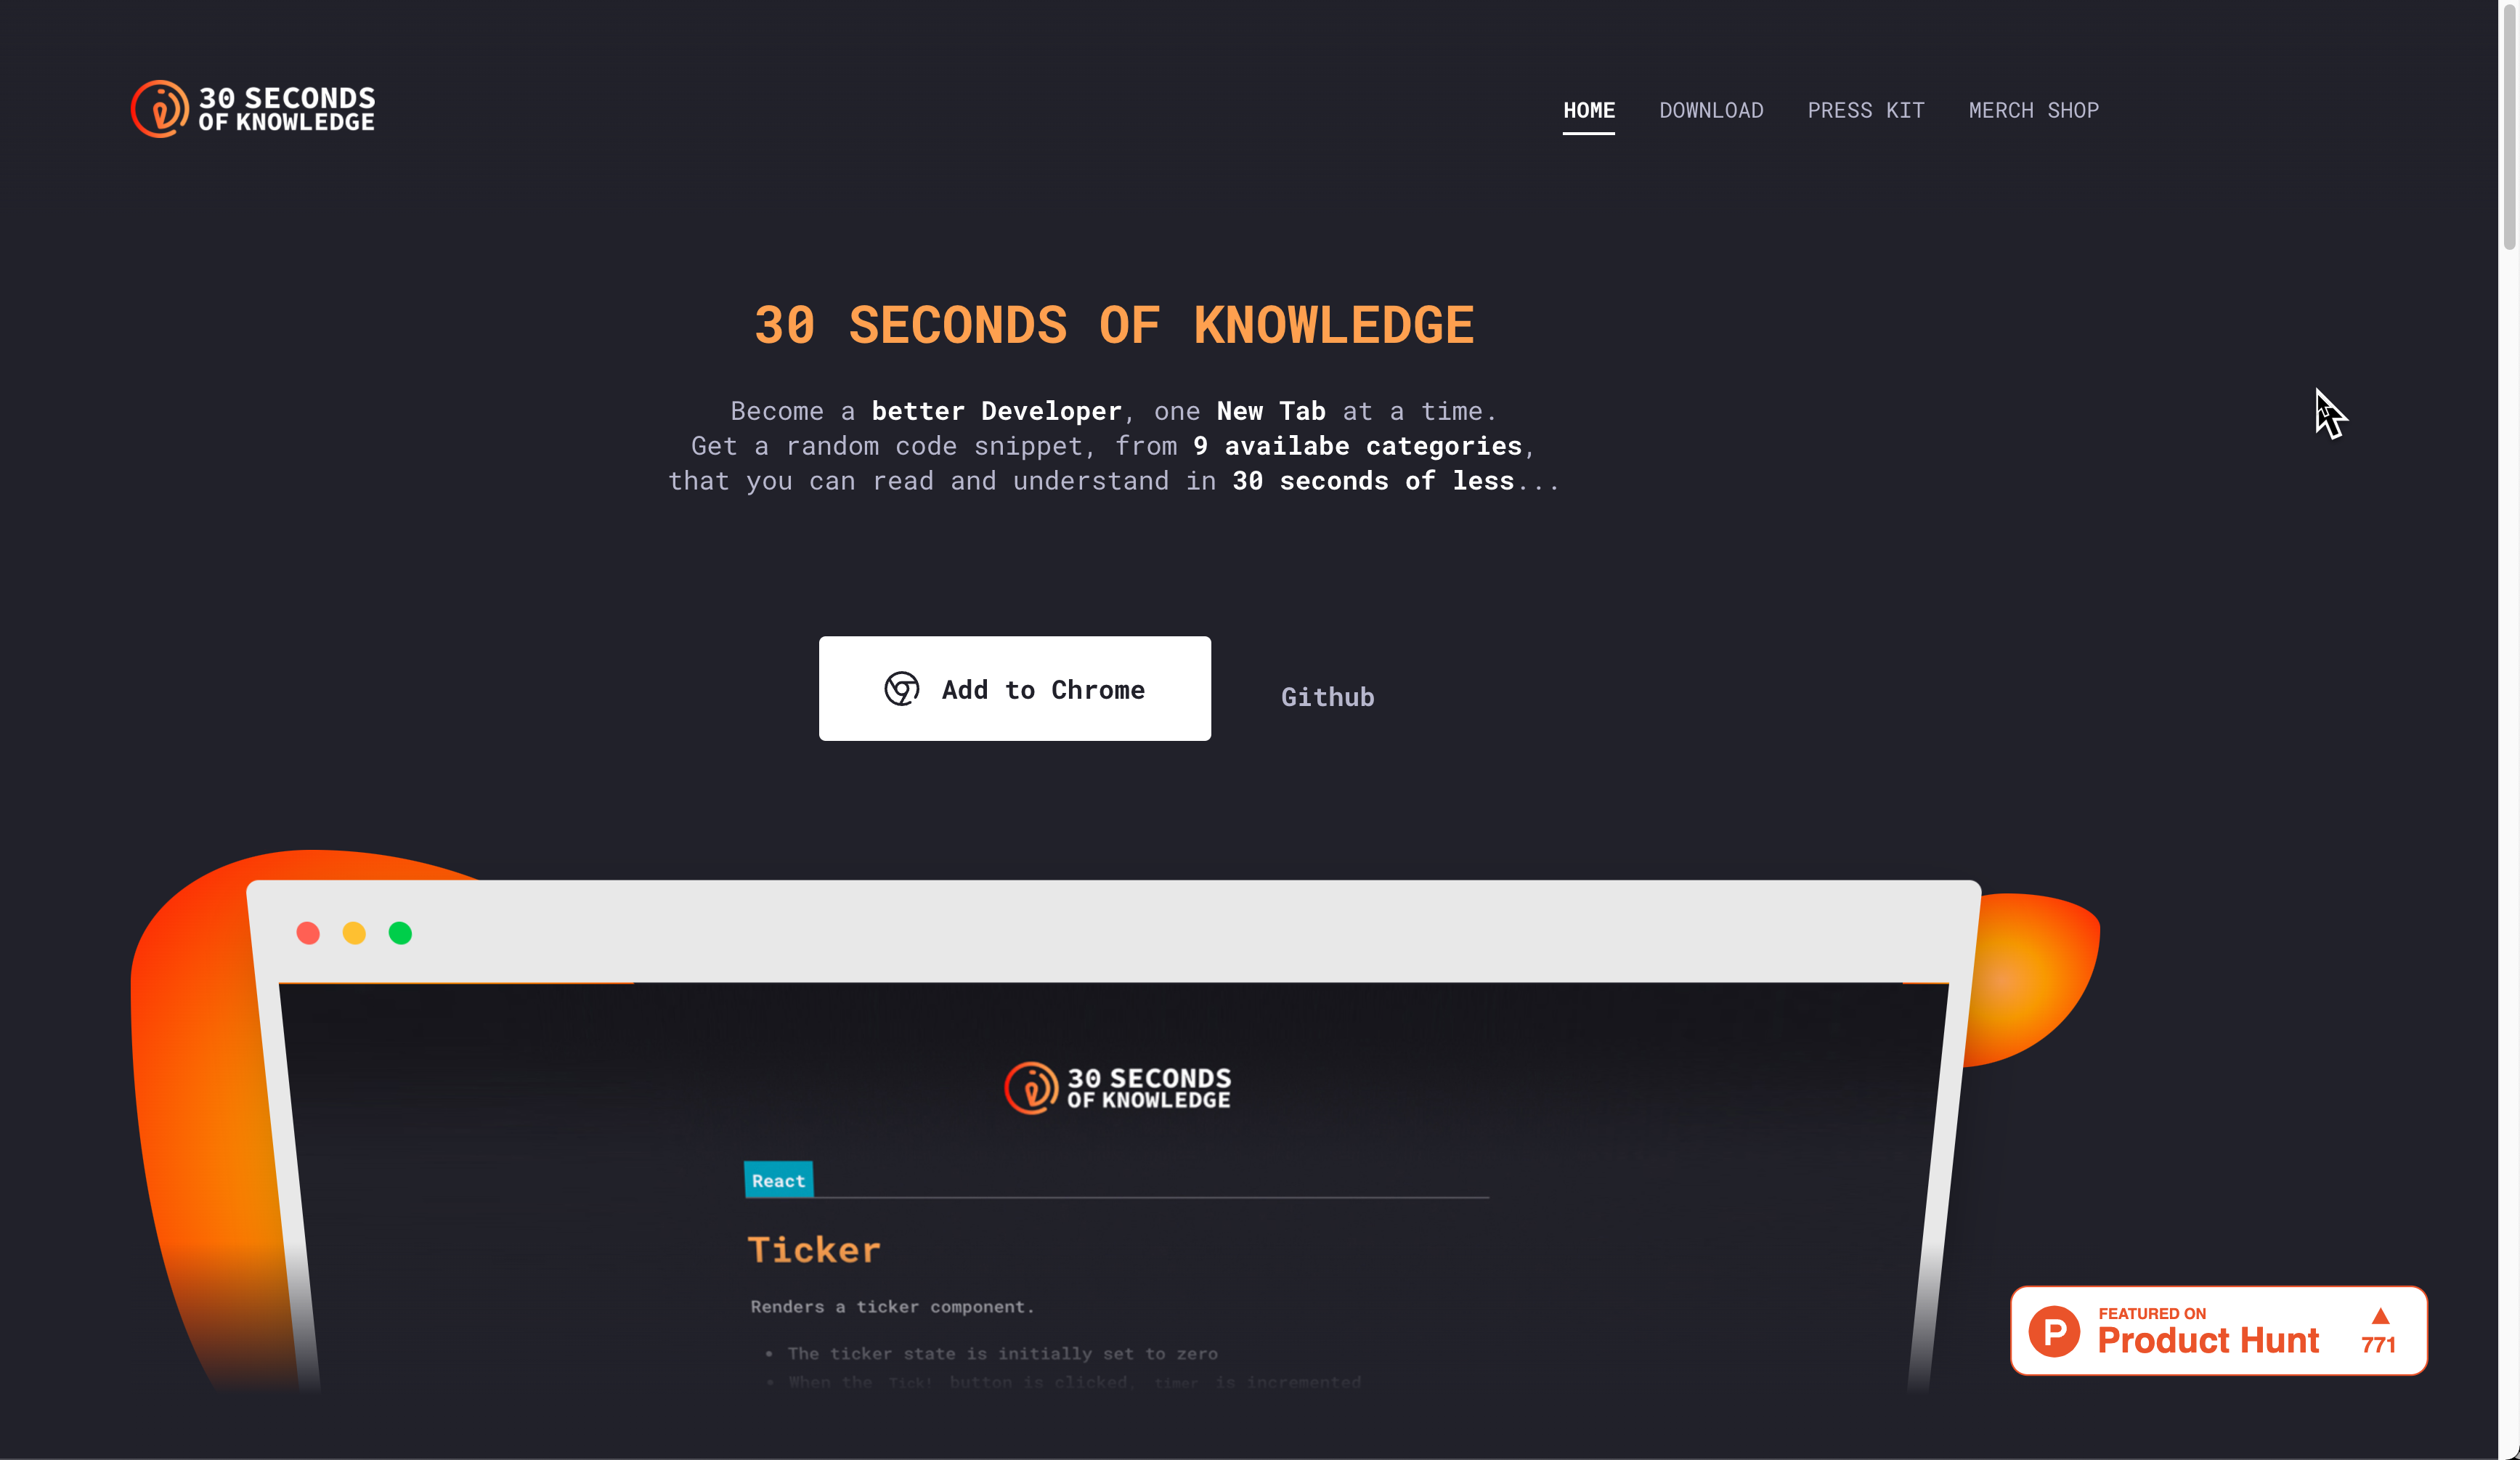 30 SECONDS OF KNOWLEDGE image